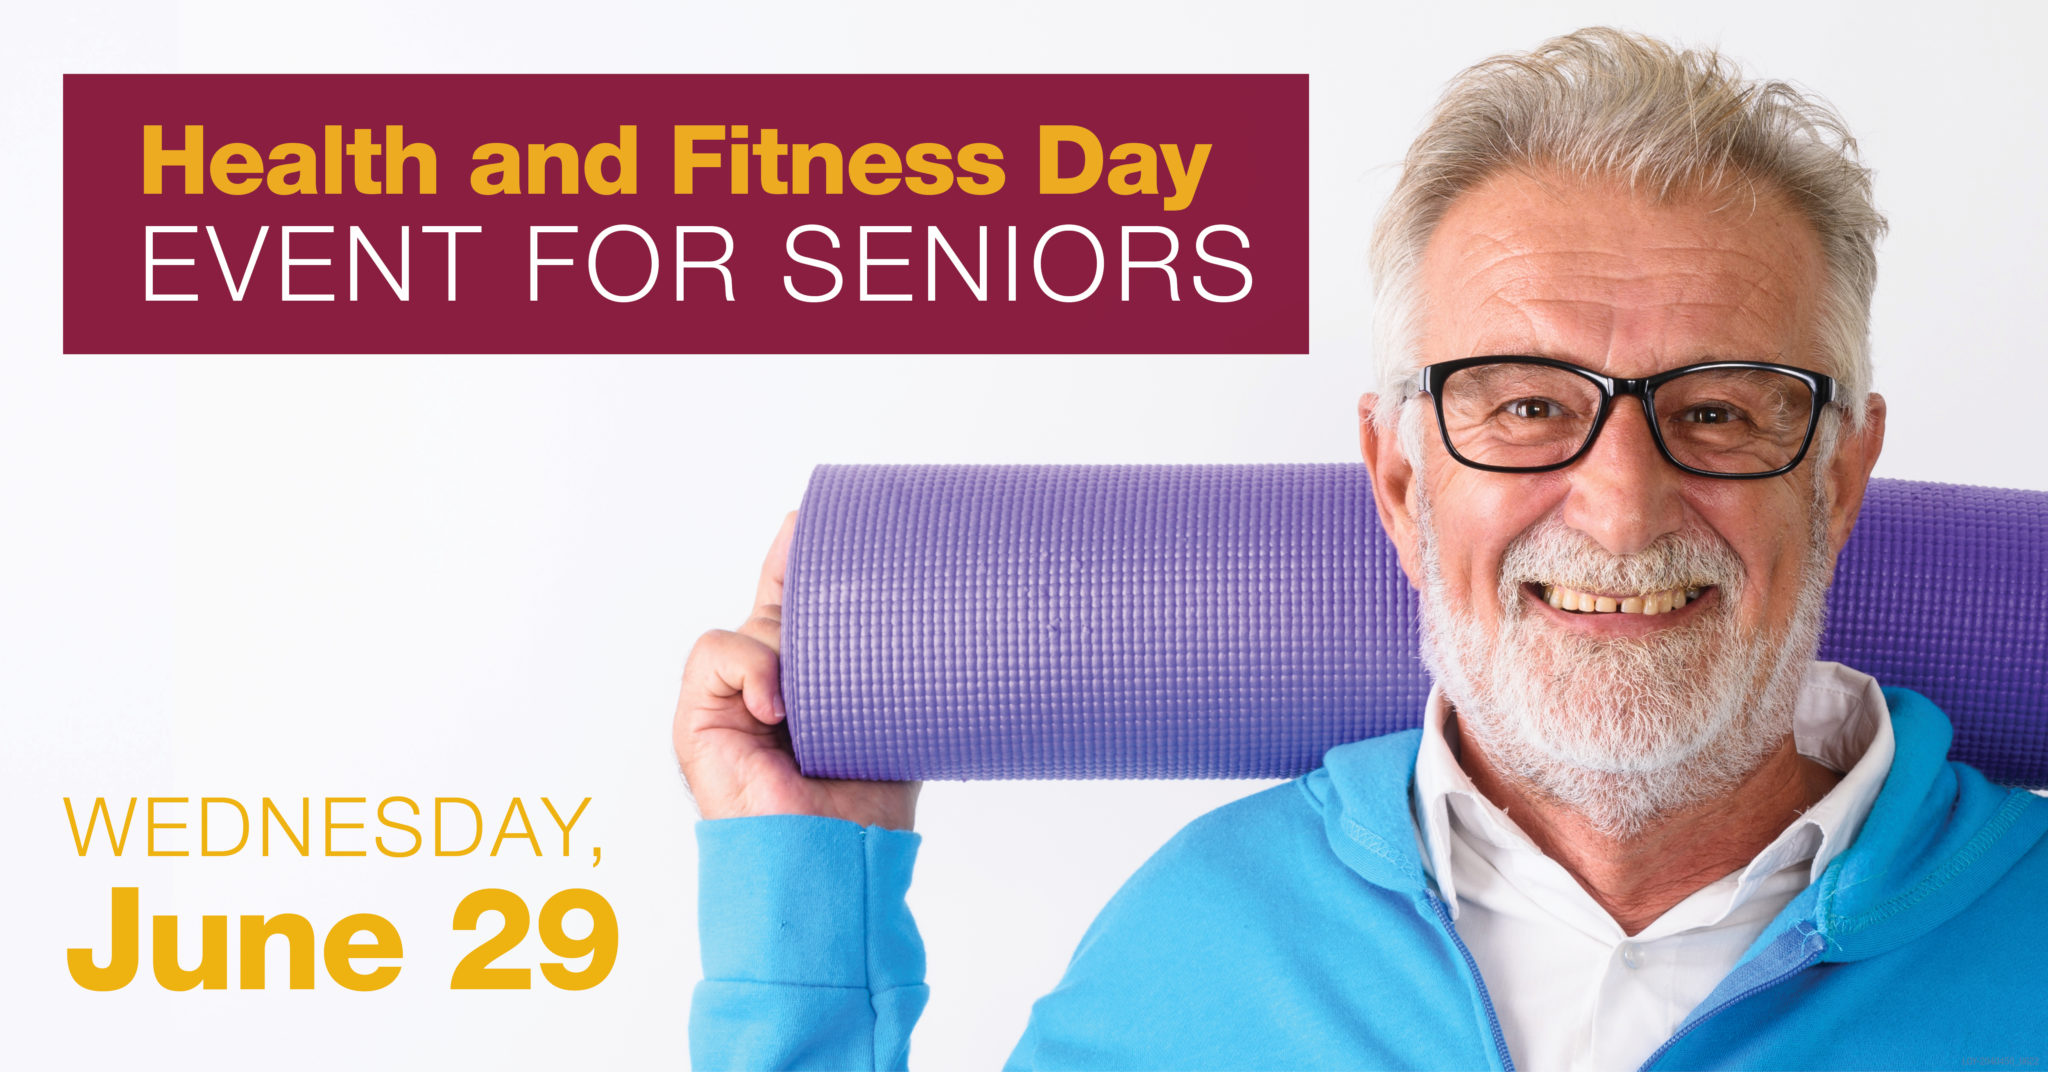 Health and Fitness Day Event for Seniors